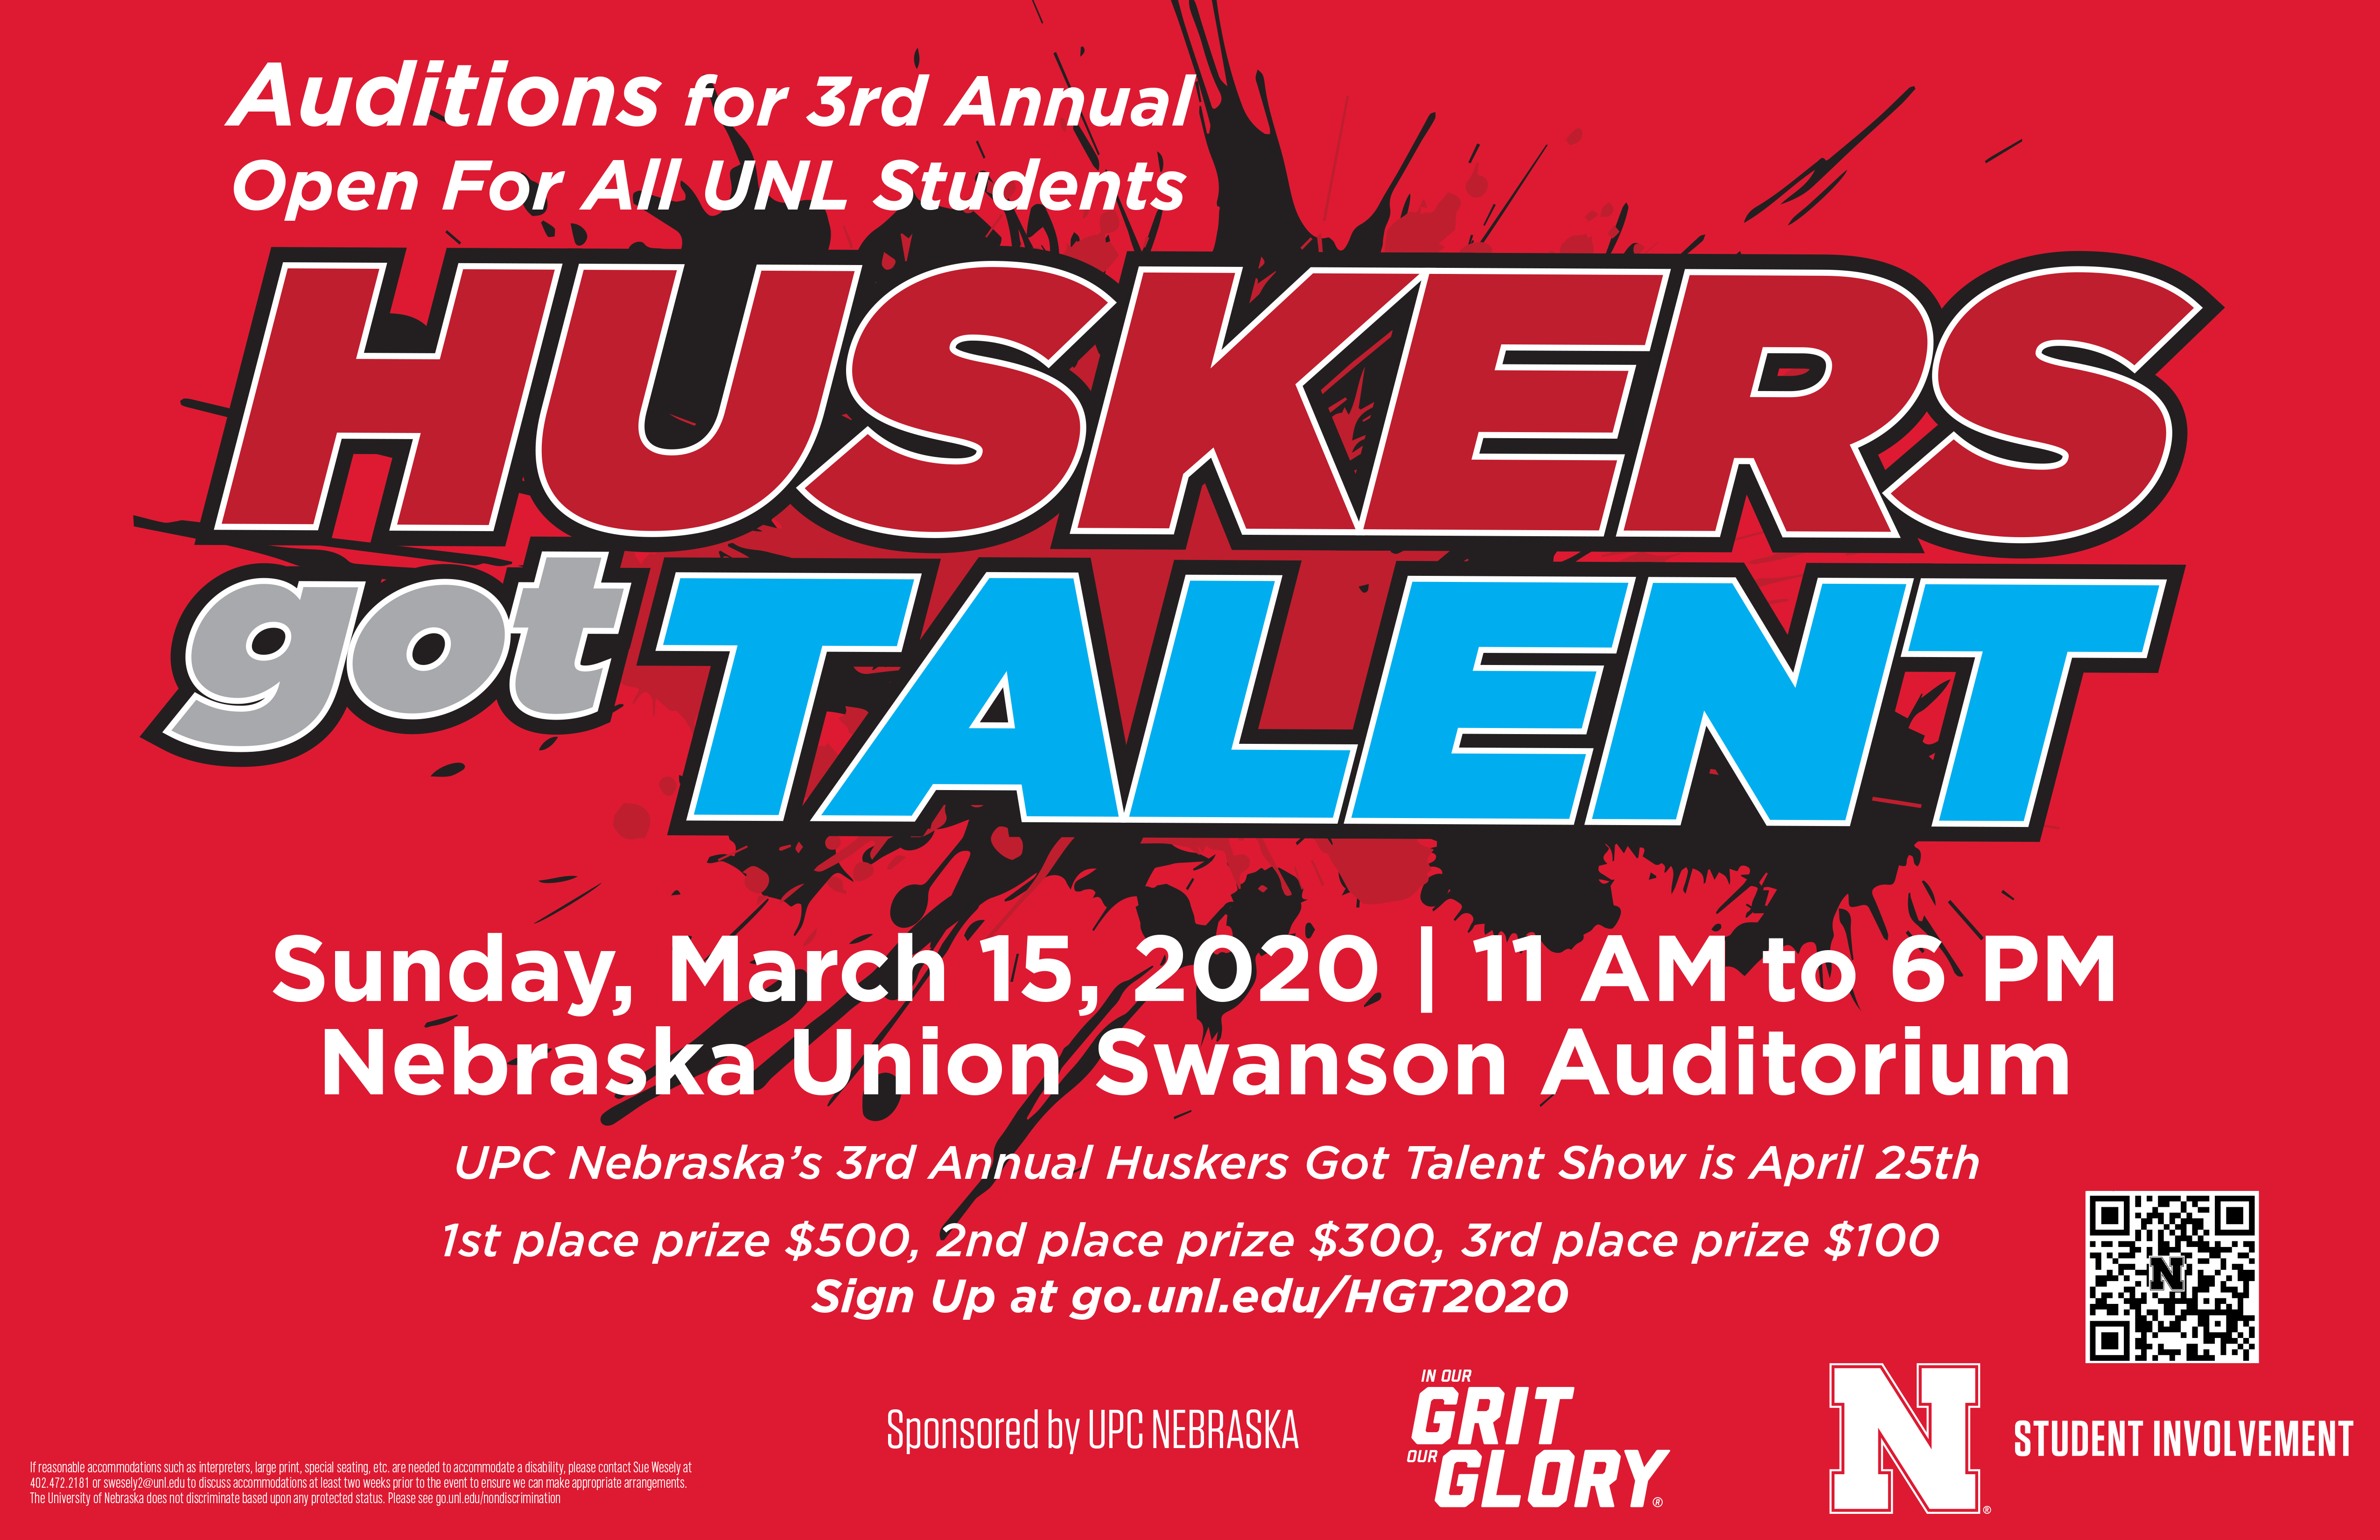 Show us what you're made of and audition for the 3rd annual Huskers Got Talent! 